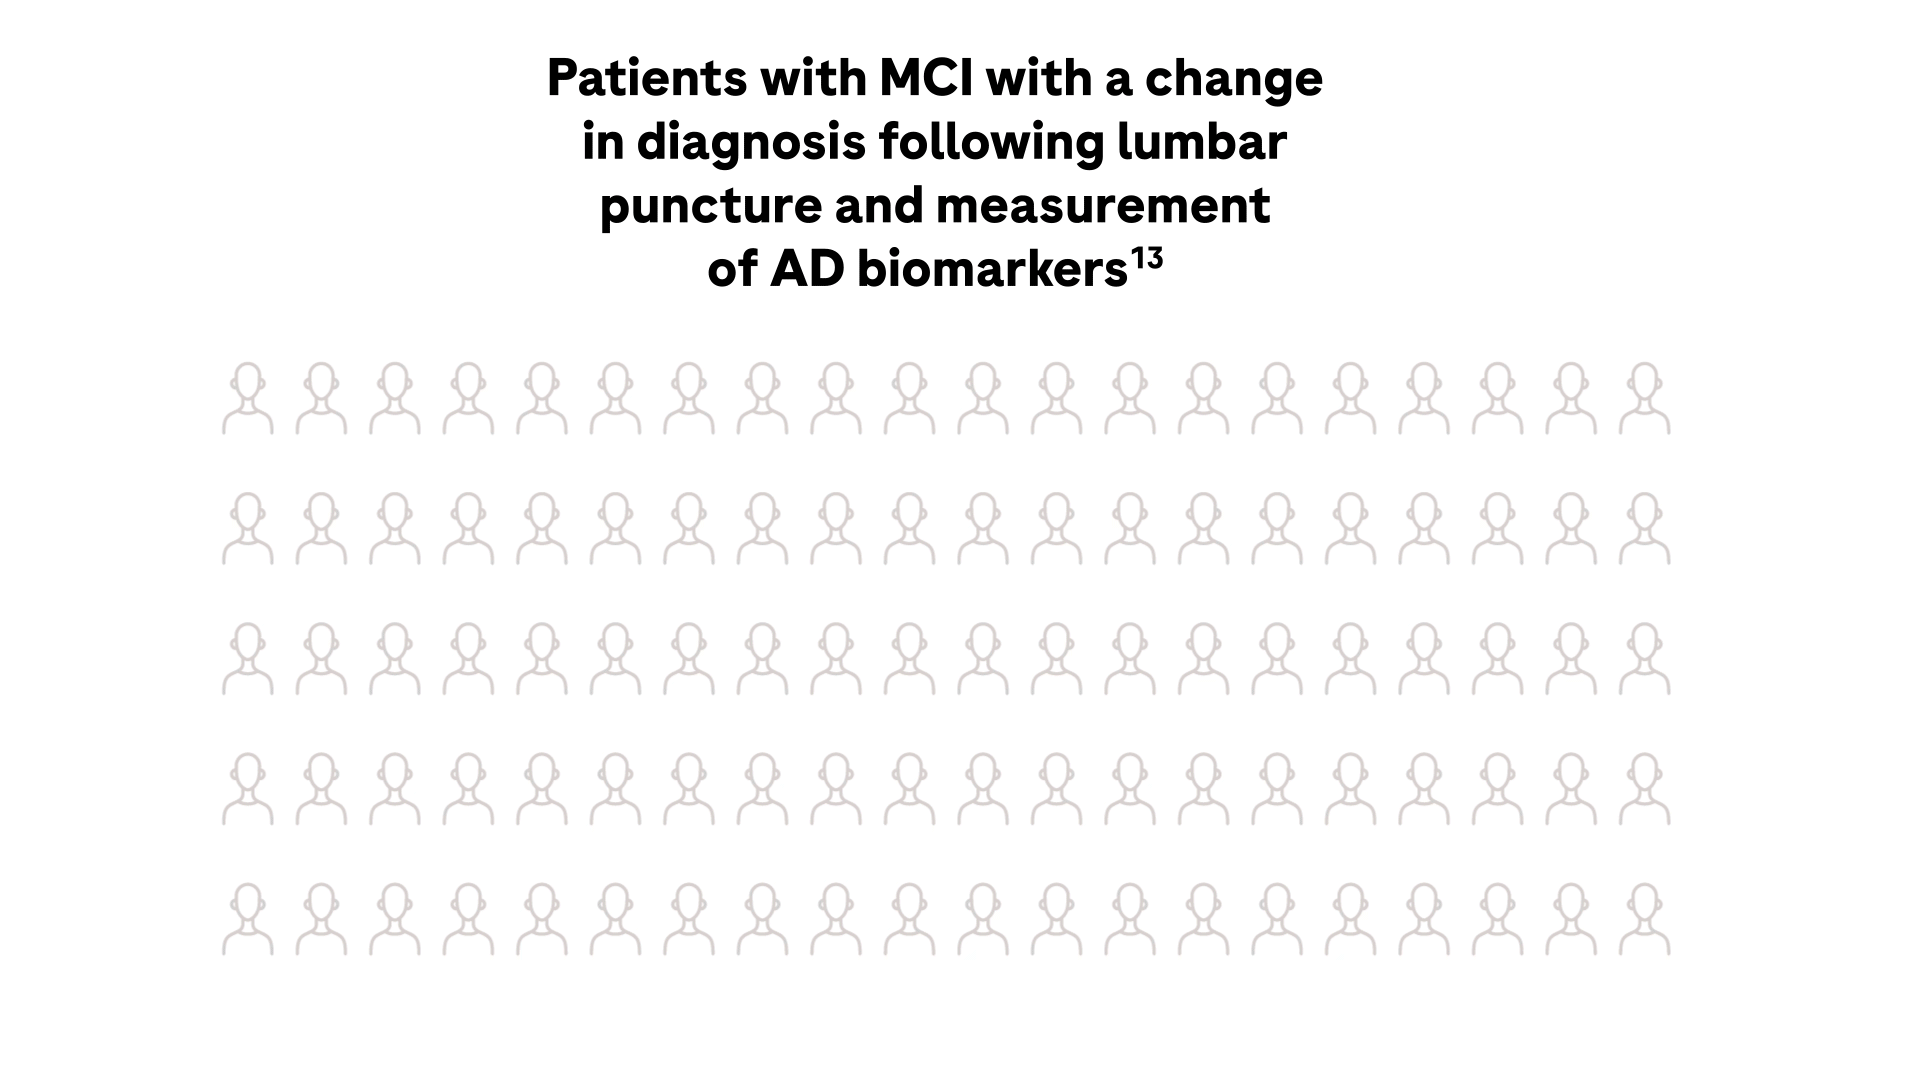 32% Patients with MCI with a change in diagnosis following lumbar puncture and measurement of AD biomarkers | 61% patients reclassified as having AD | Nearly one third of patients had a change in diagnosis; of those patients, 61% were reclassified as having AD